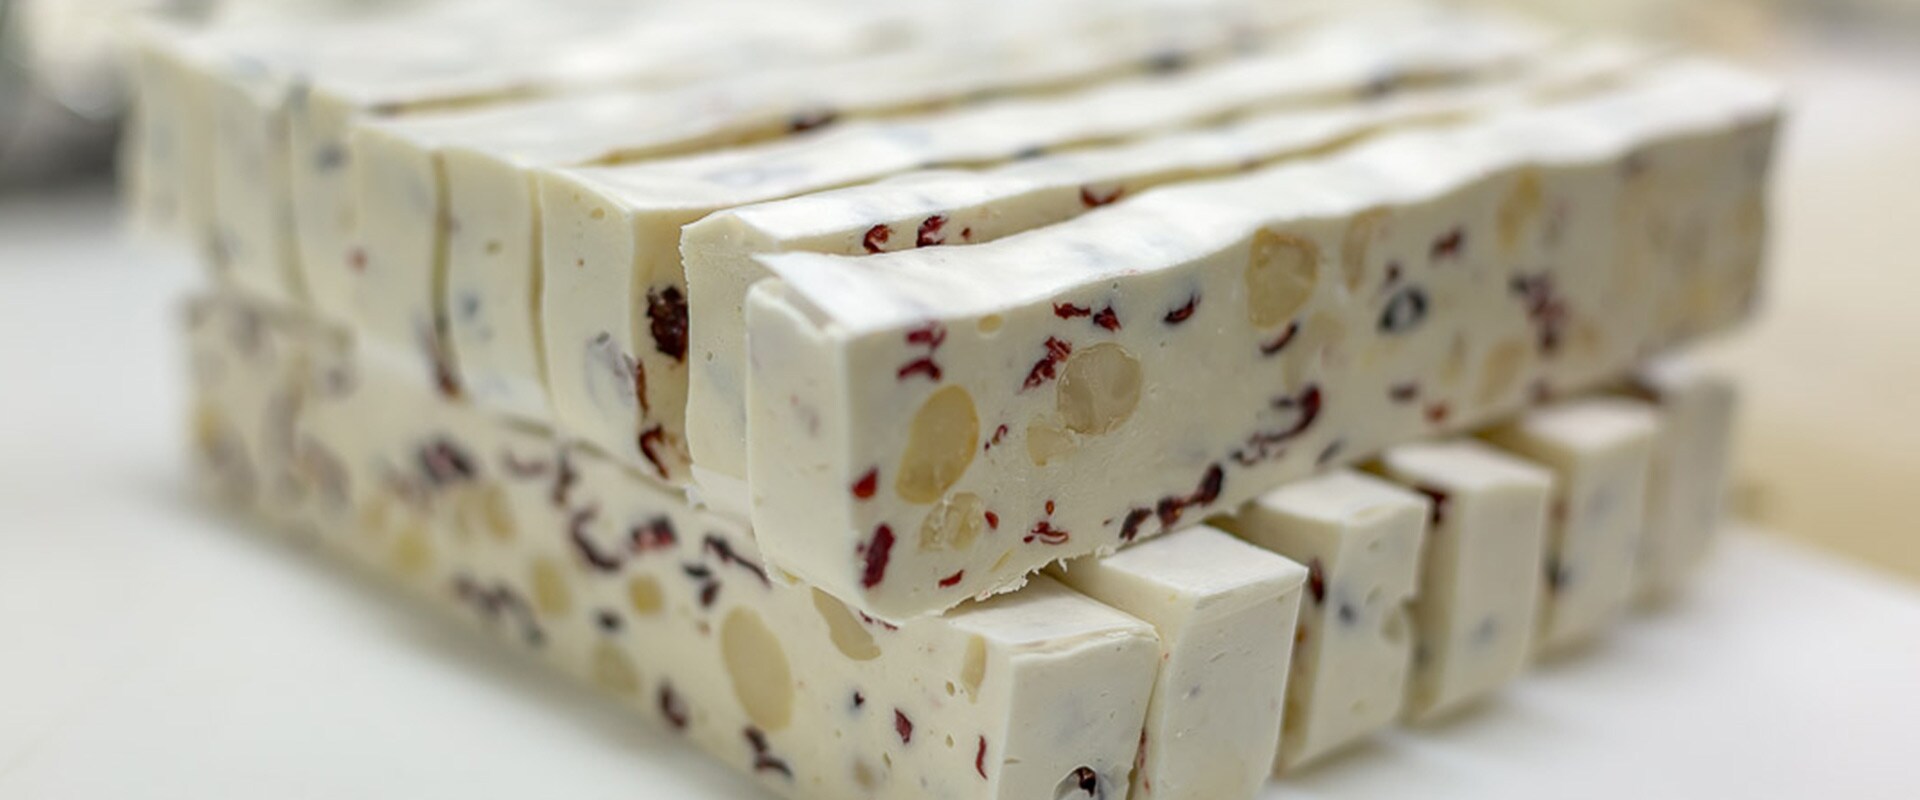 margaret river nougat company blocks of nougat with cranberry and macadamia